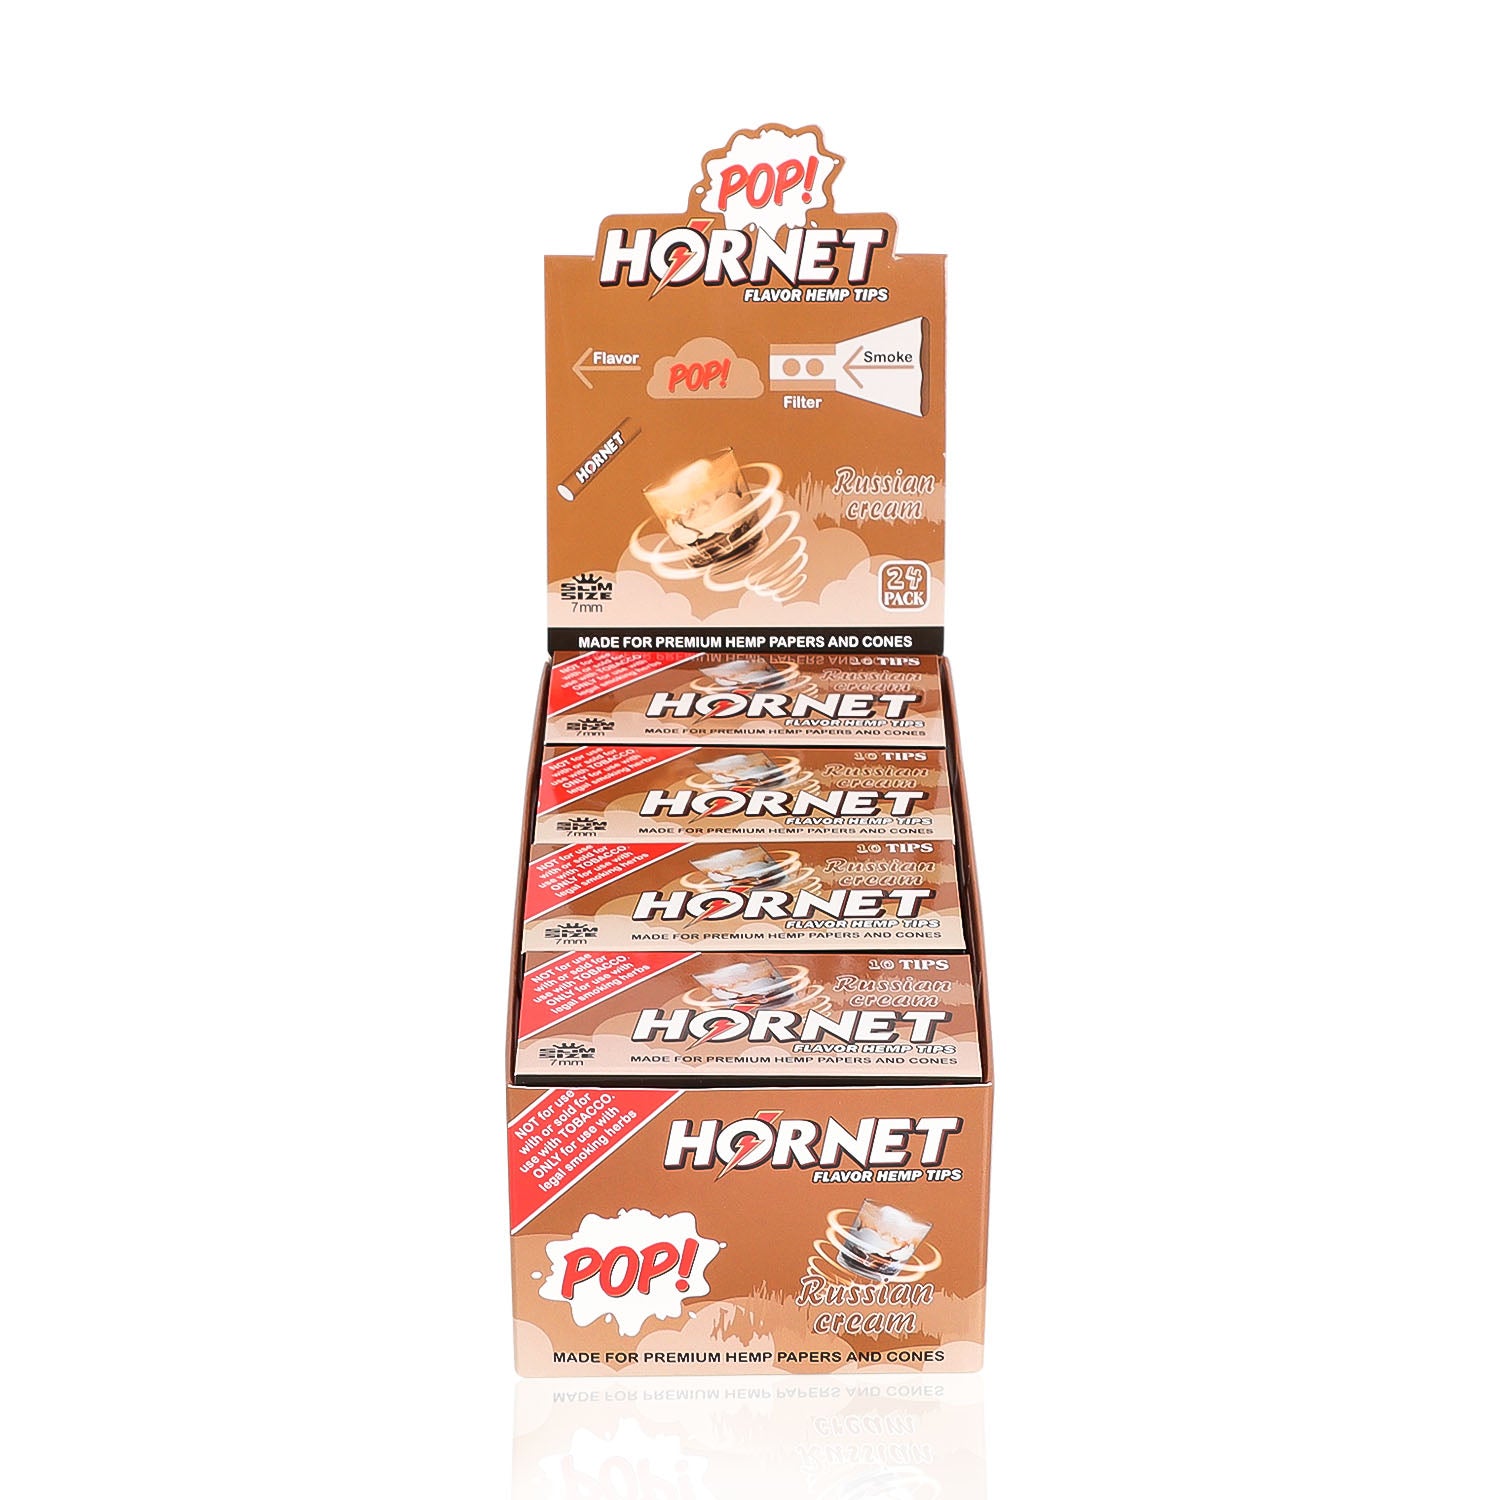 HORNET Russia Cream Flavors Filter Tips with Flavored Pop, 7 mm Filter Tips, 10 Tips / Pack 24 Packs / Box